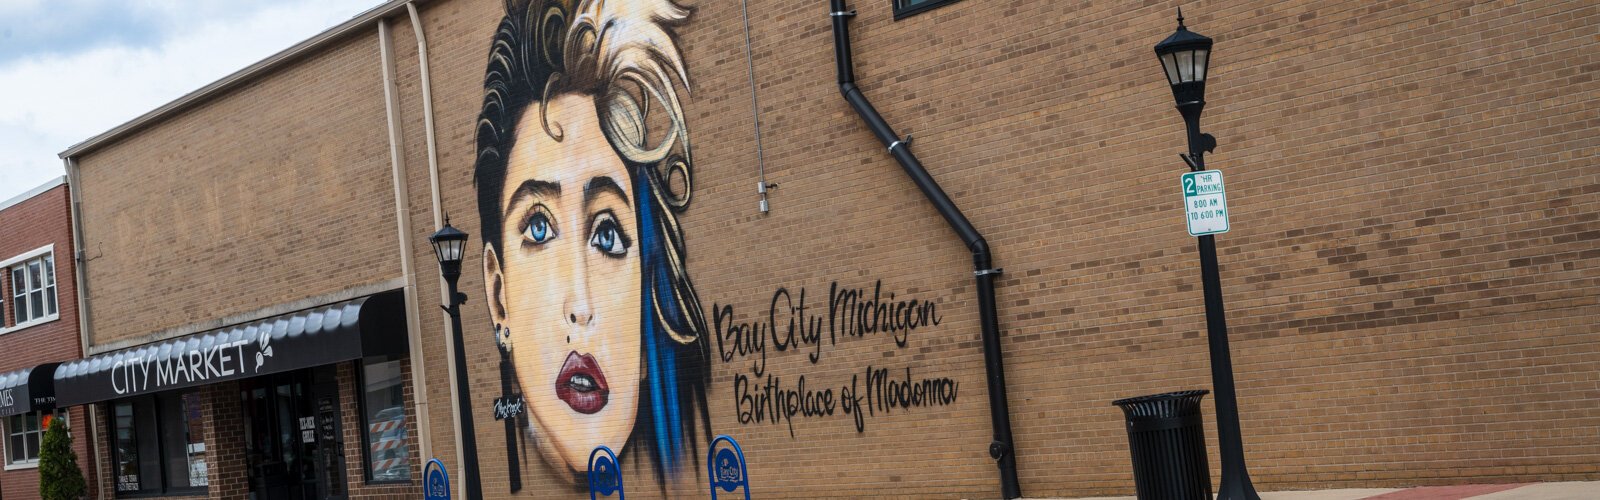 One of Bay City's most famous former residents is Madonna. Her portrait is captured downtown on the side of City Market.